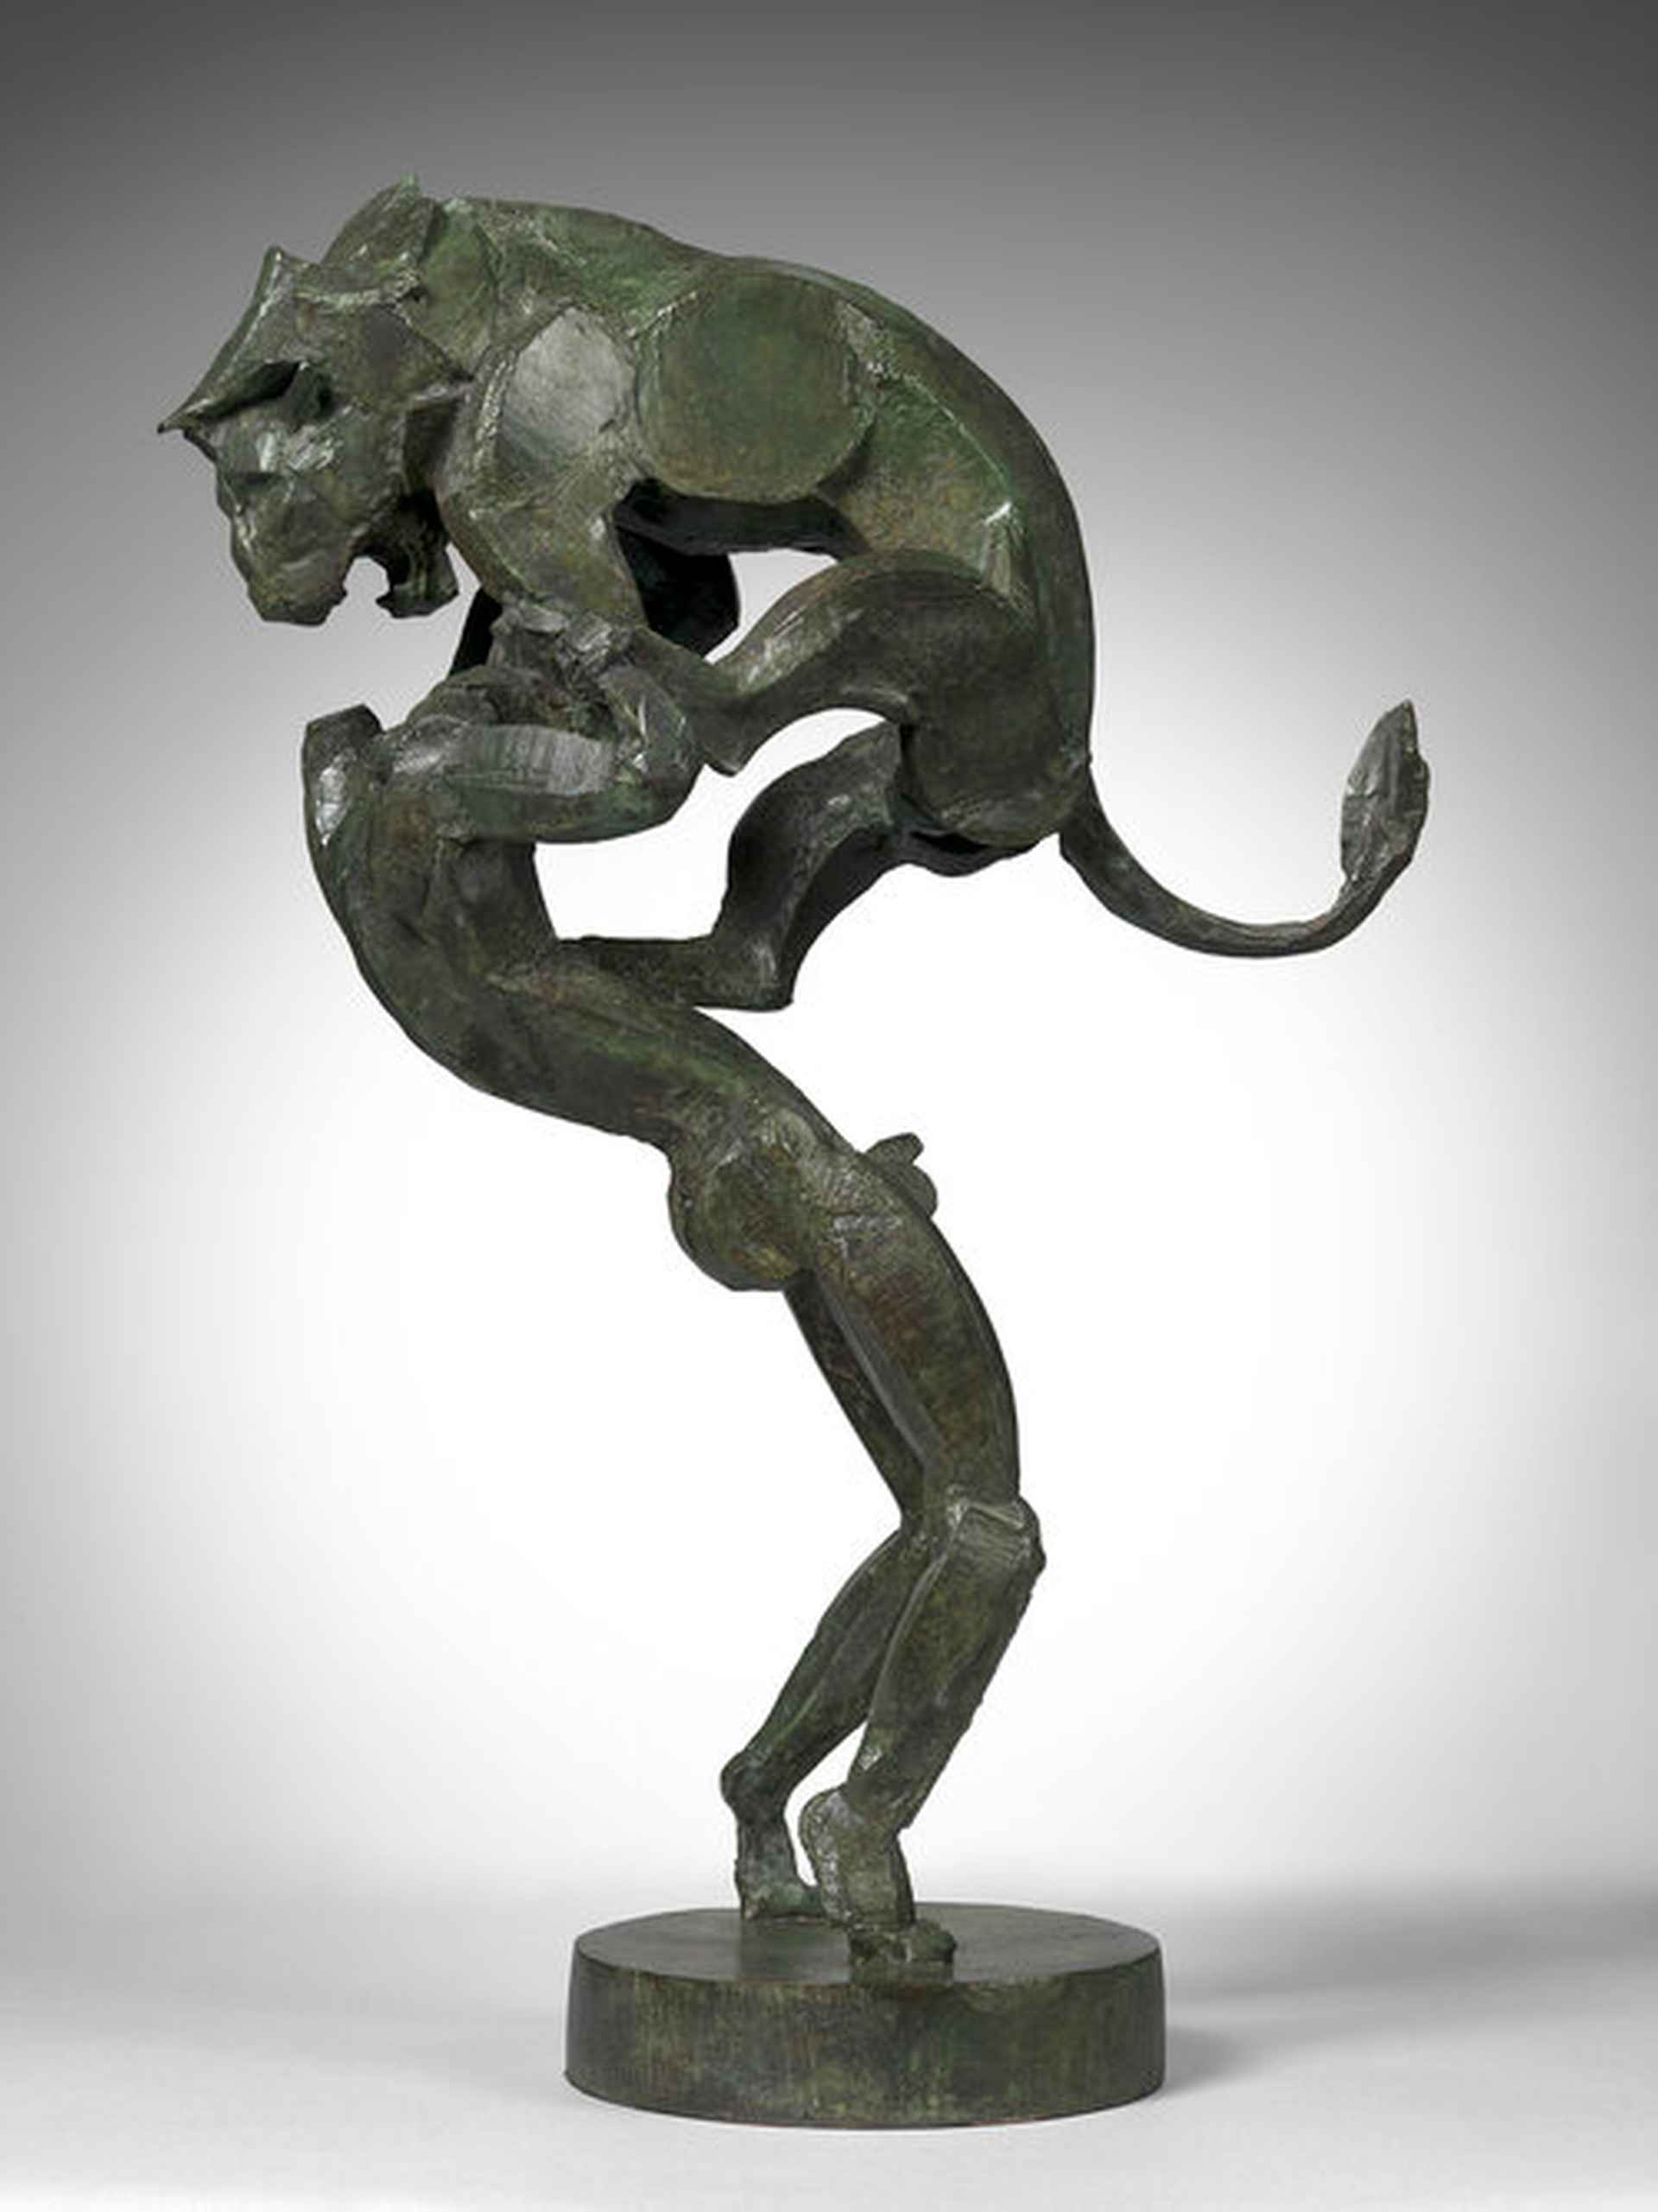 Hercules & Lion (maquette) by Sophie Dickens